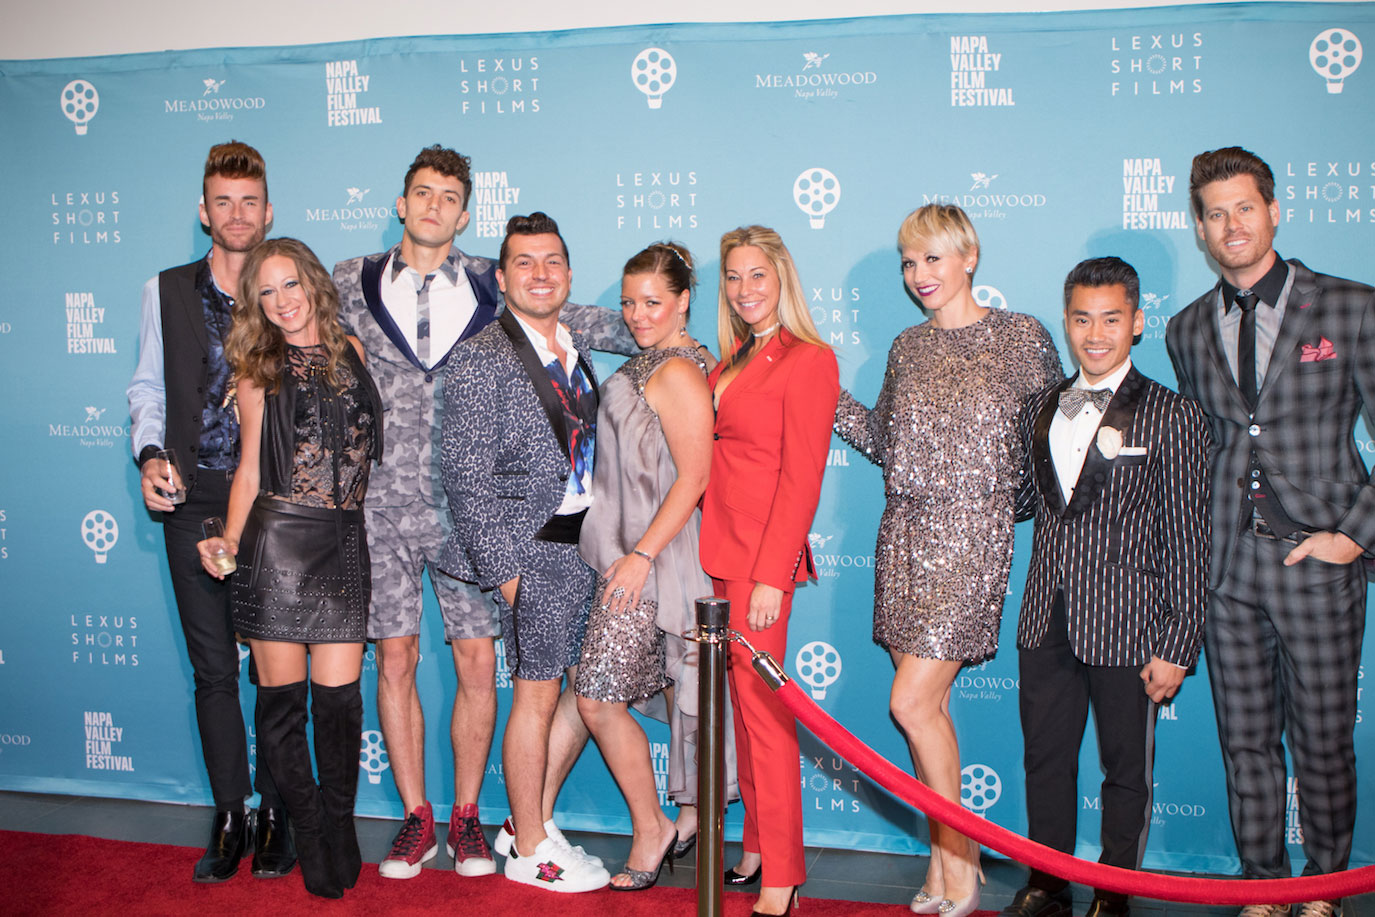 The Jake posse includes Penelope Moore, second from left, model Robert Mull, and Jake Wall; Tiffany Cummins in red pantsuit, and Nathan Johnson far right